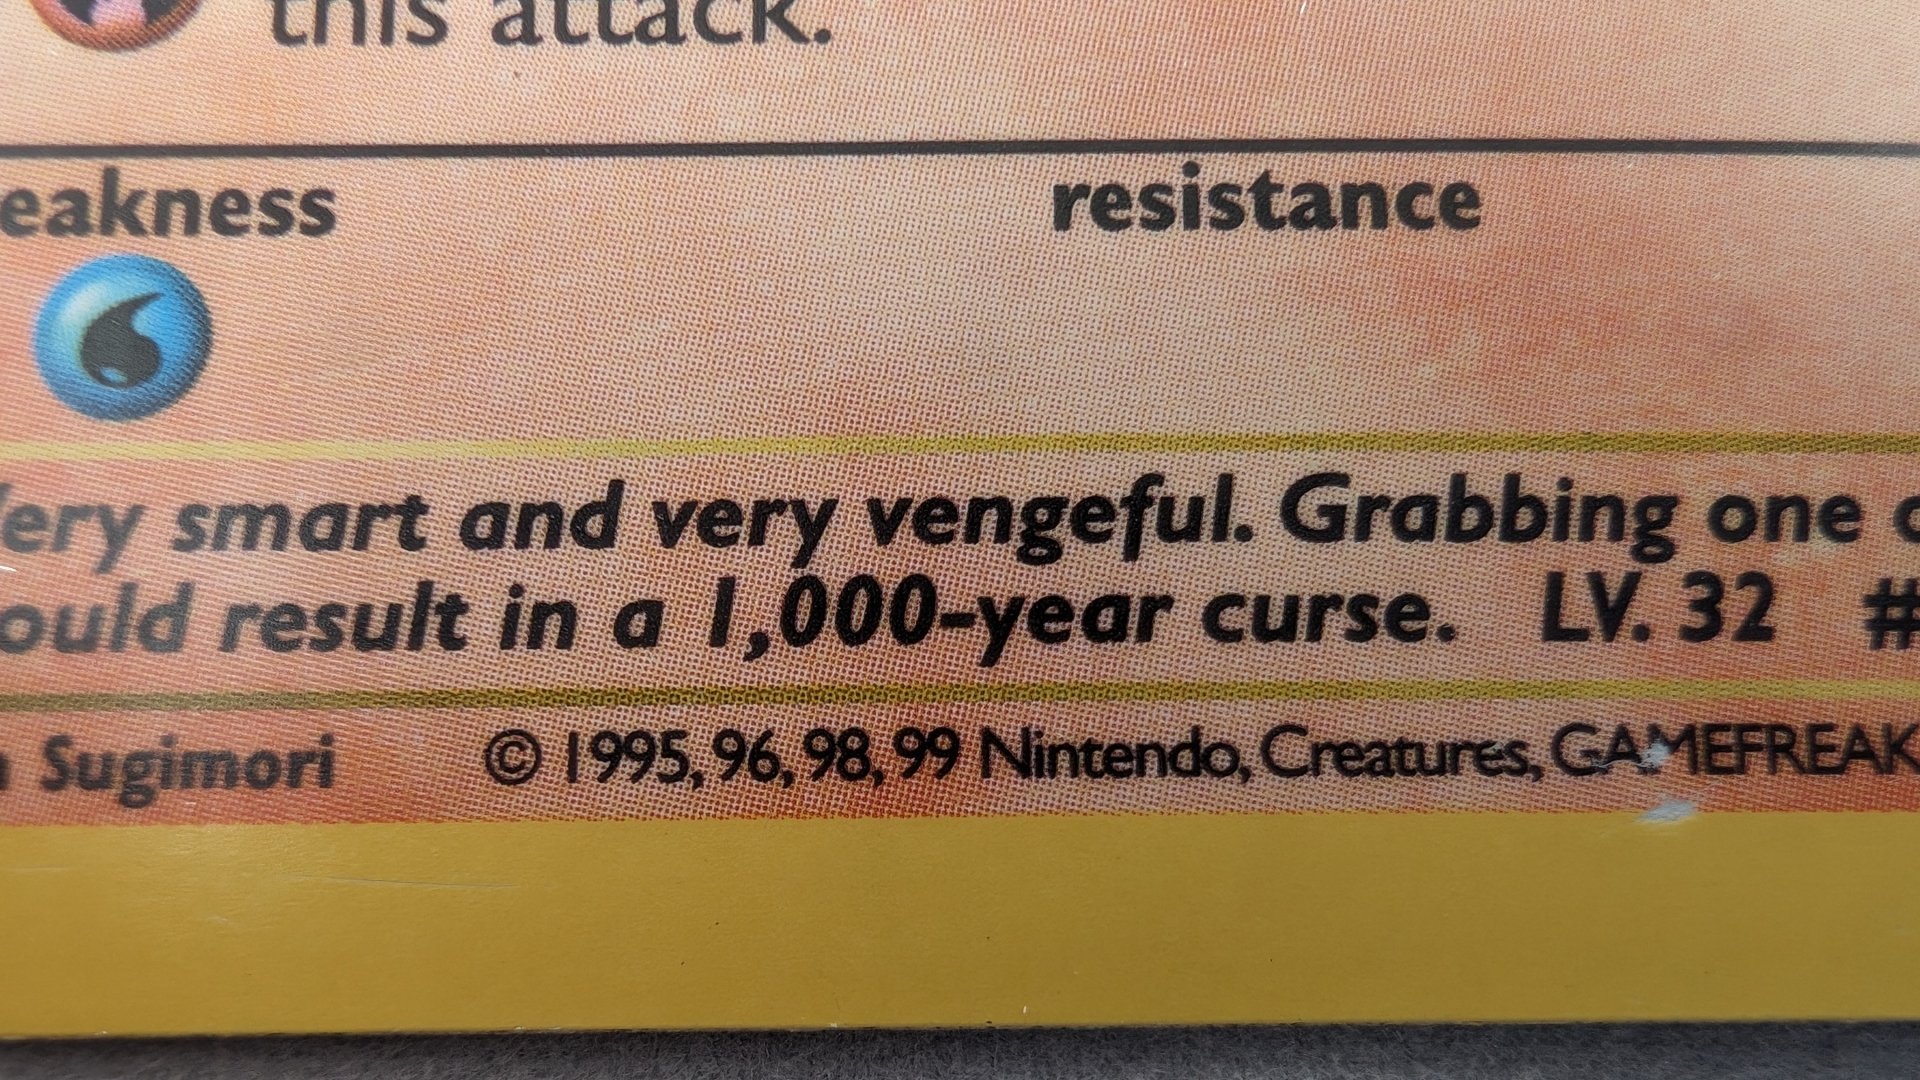 Copyright information on a Shadowless pokemon card, which lists 1995, 96. 98, 99